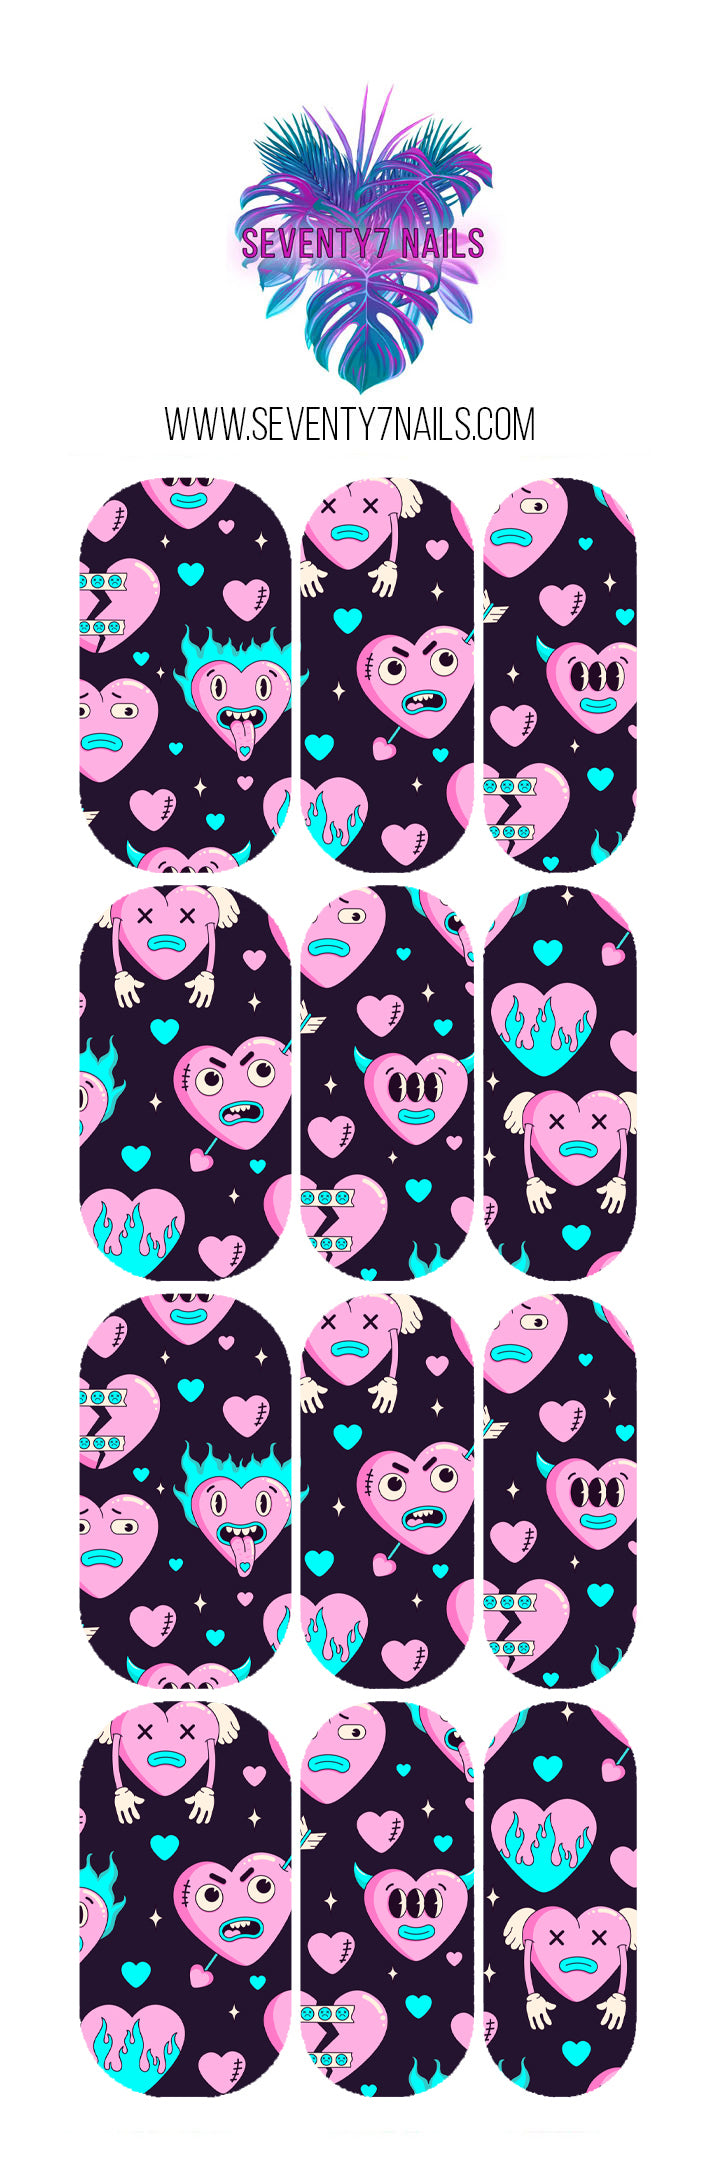 Waterslide Nail Decals - Psycho Hearts